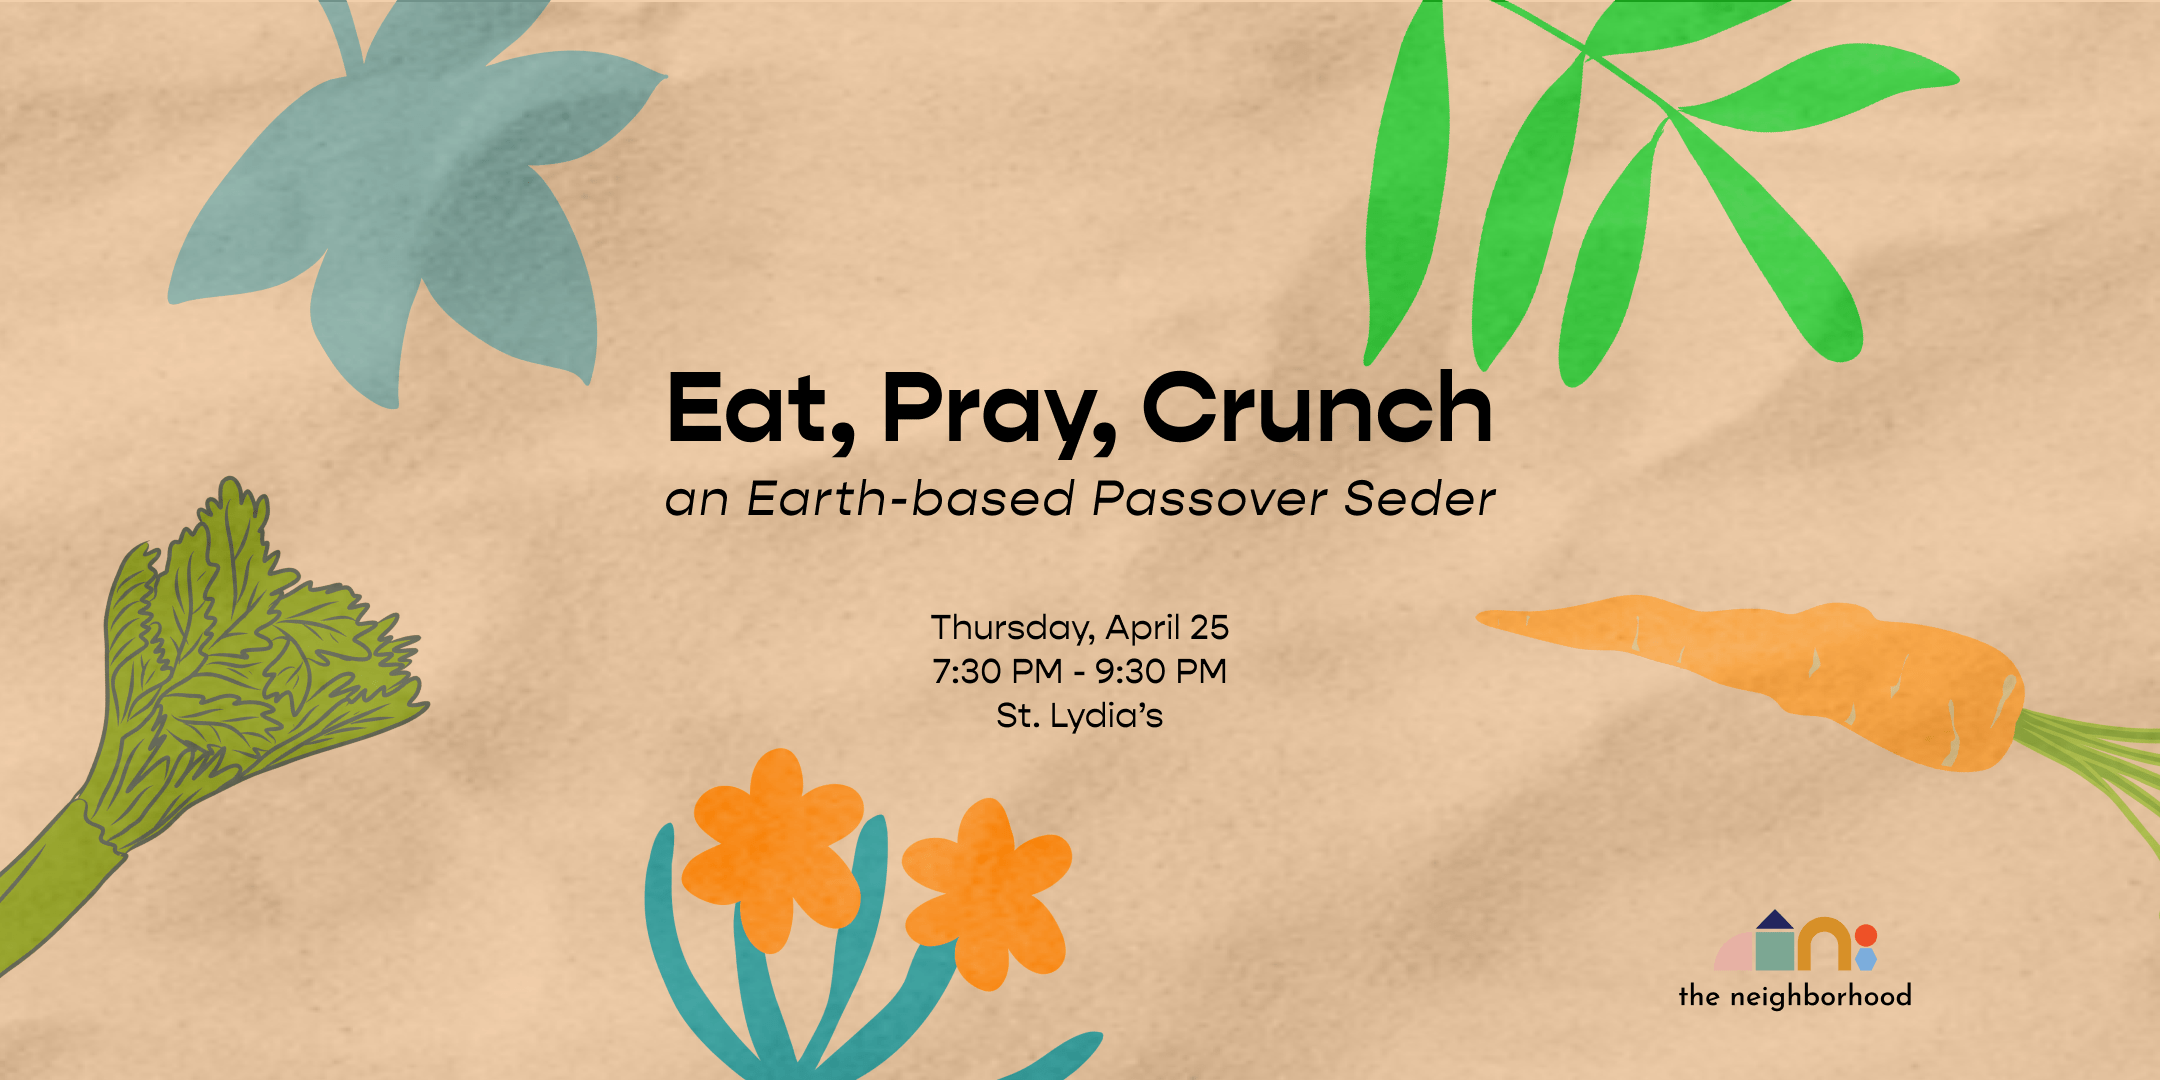 Eat, Pray, Crunch: An Earth-based Passover Seder